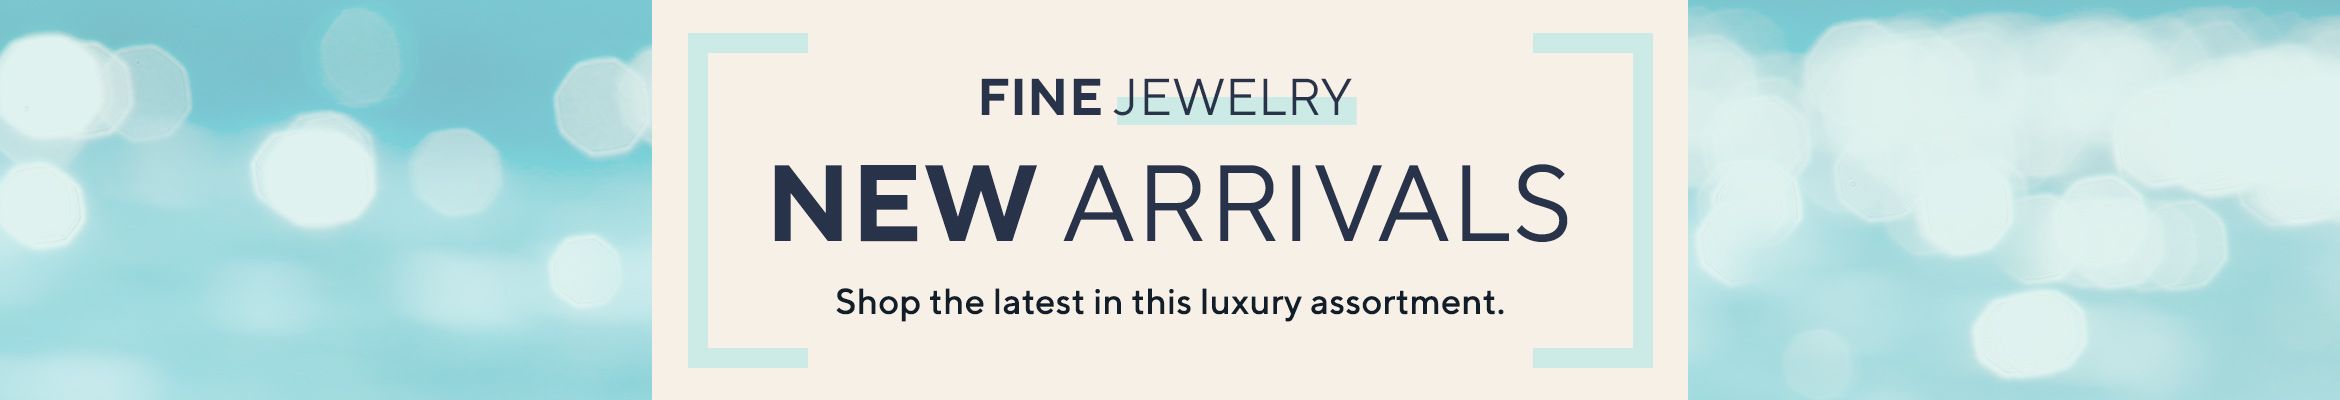 Fine Jewelry - New Arrivals - Shop the latest in this luxury assortment.